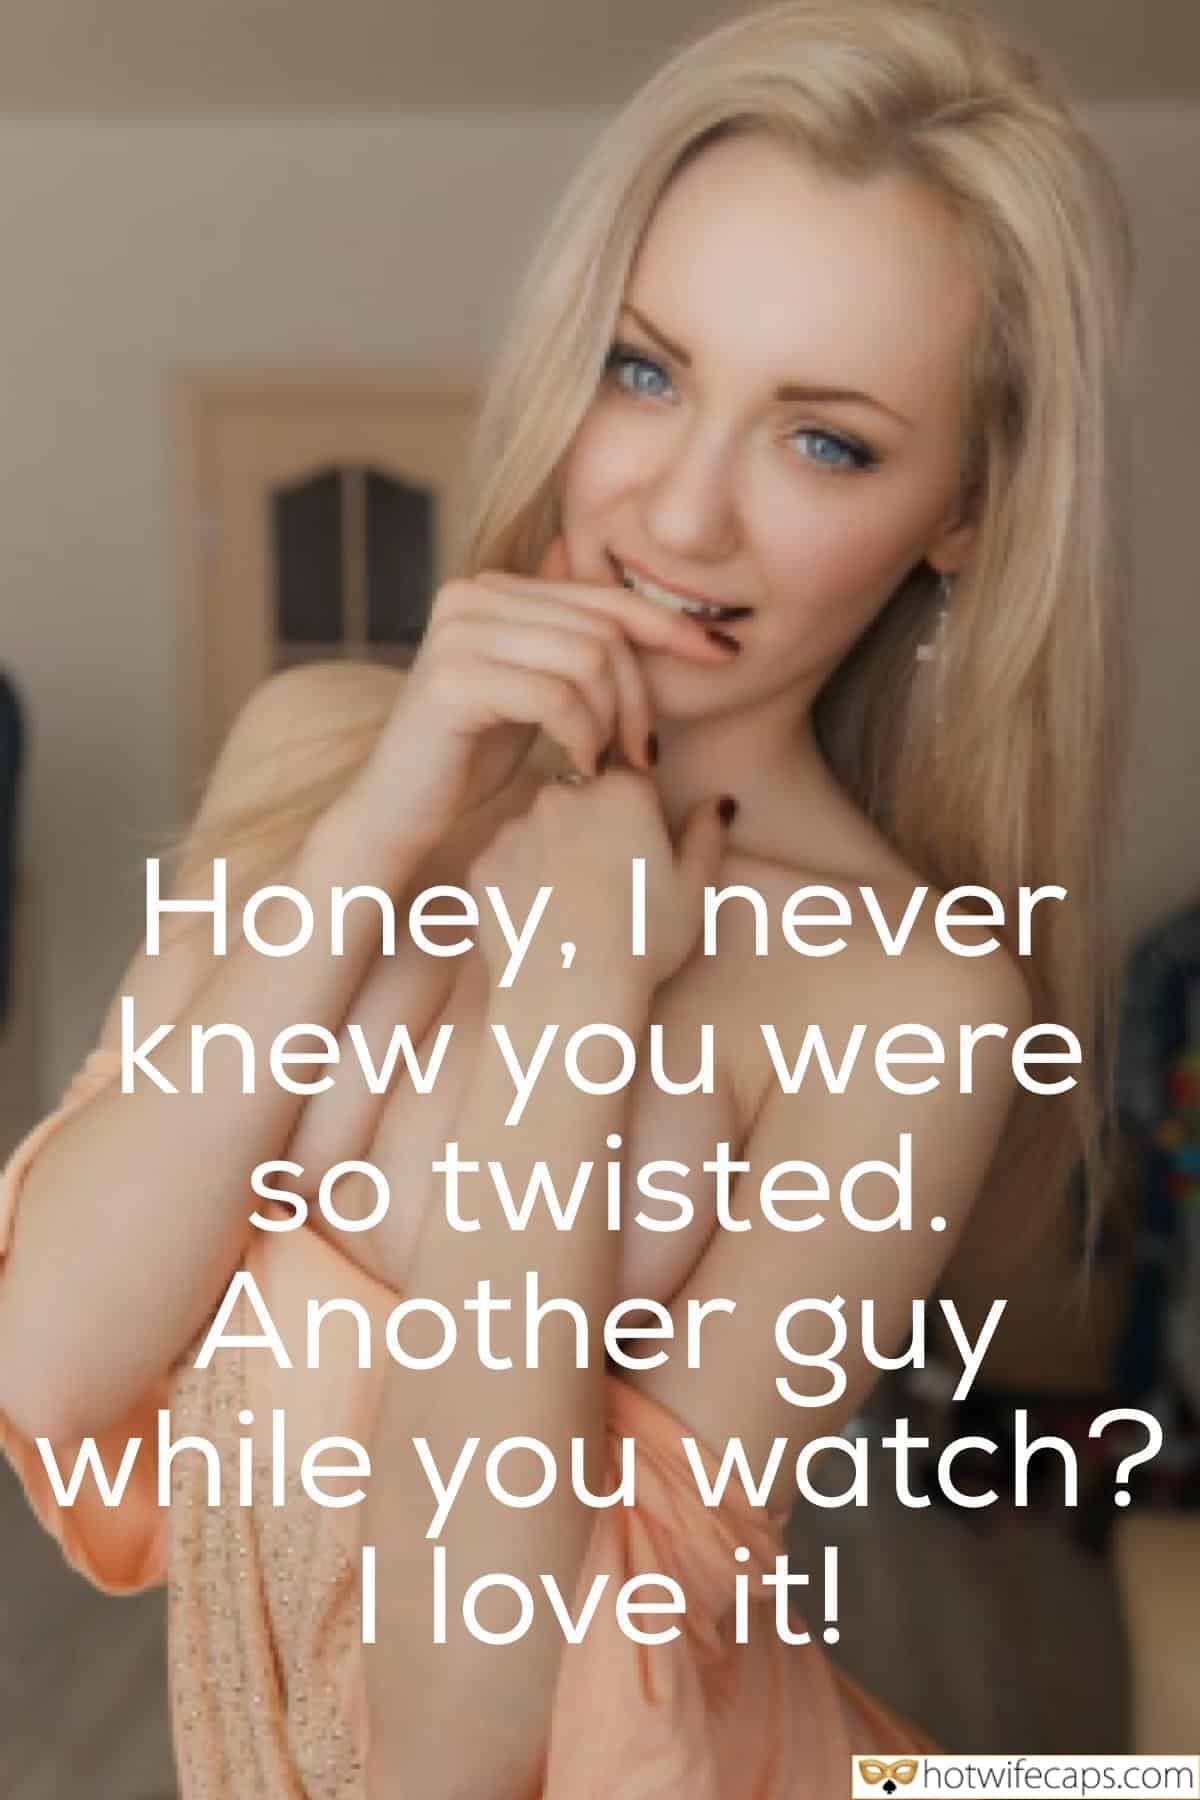 Wife Sharing Sexy Memes Cuckold Cleanup Cheating hotwife caption: Honey, I never knew you were so twisted. Another guy while you watch? I love it! Nasty Blonde in a Light Blouse